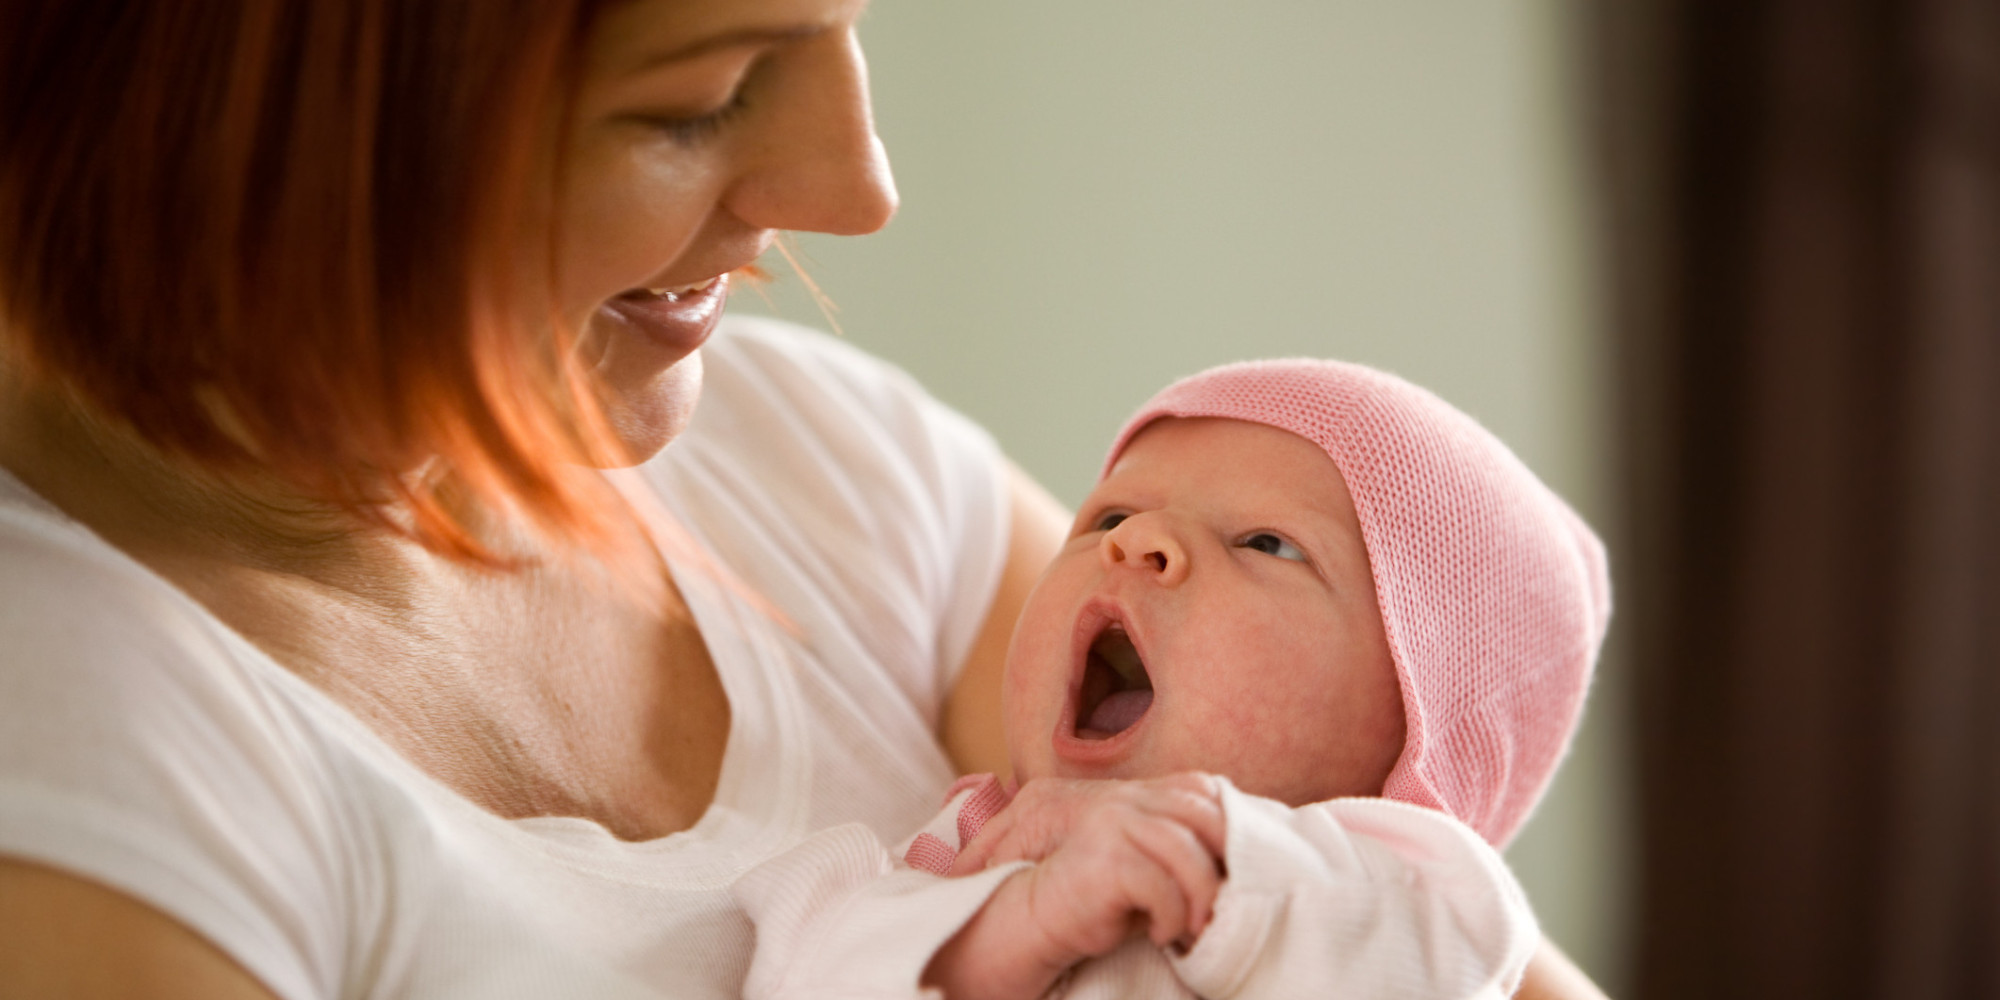 5 Essential tips for taking care of babies